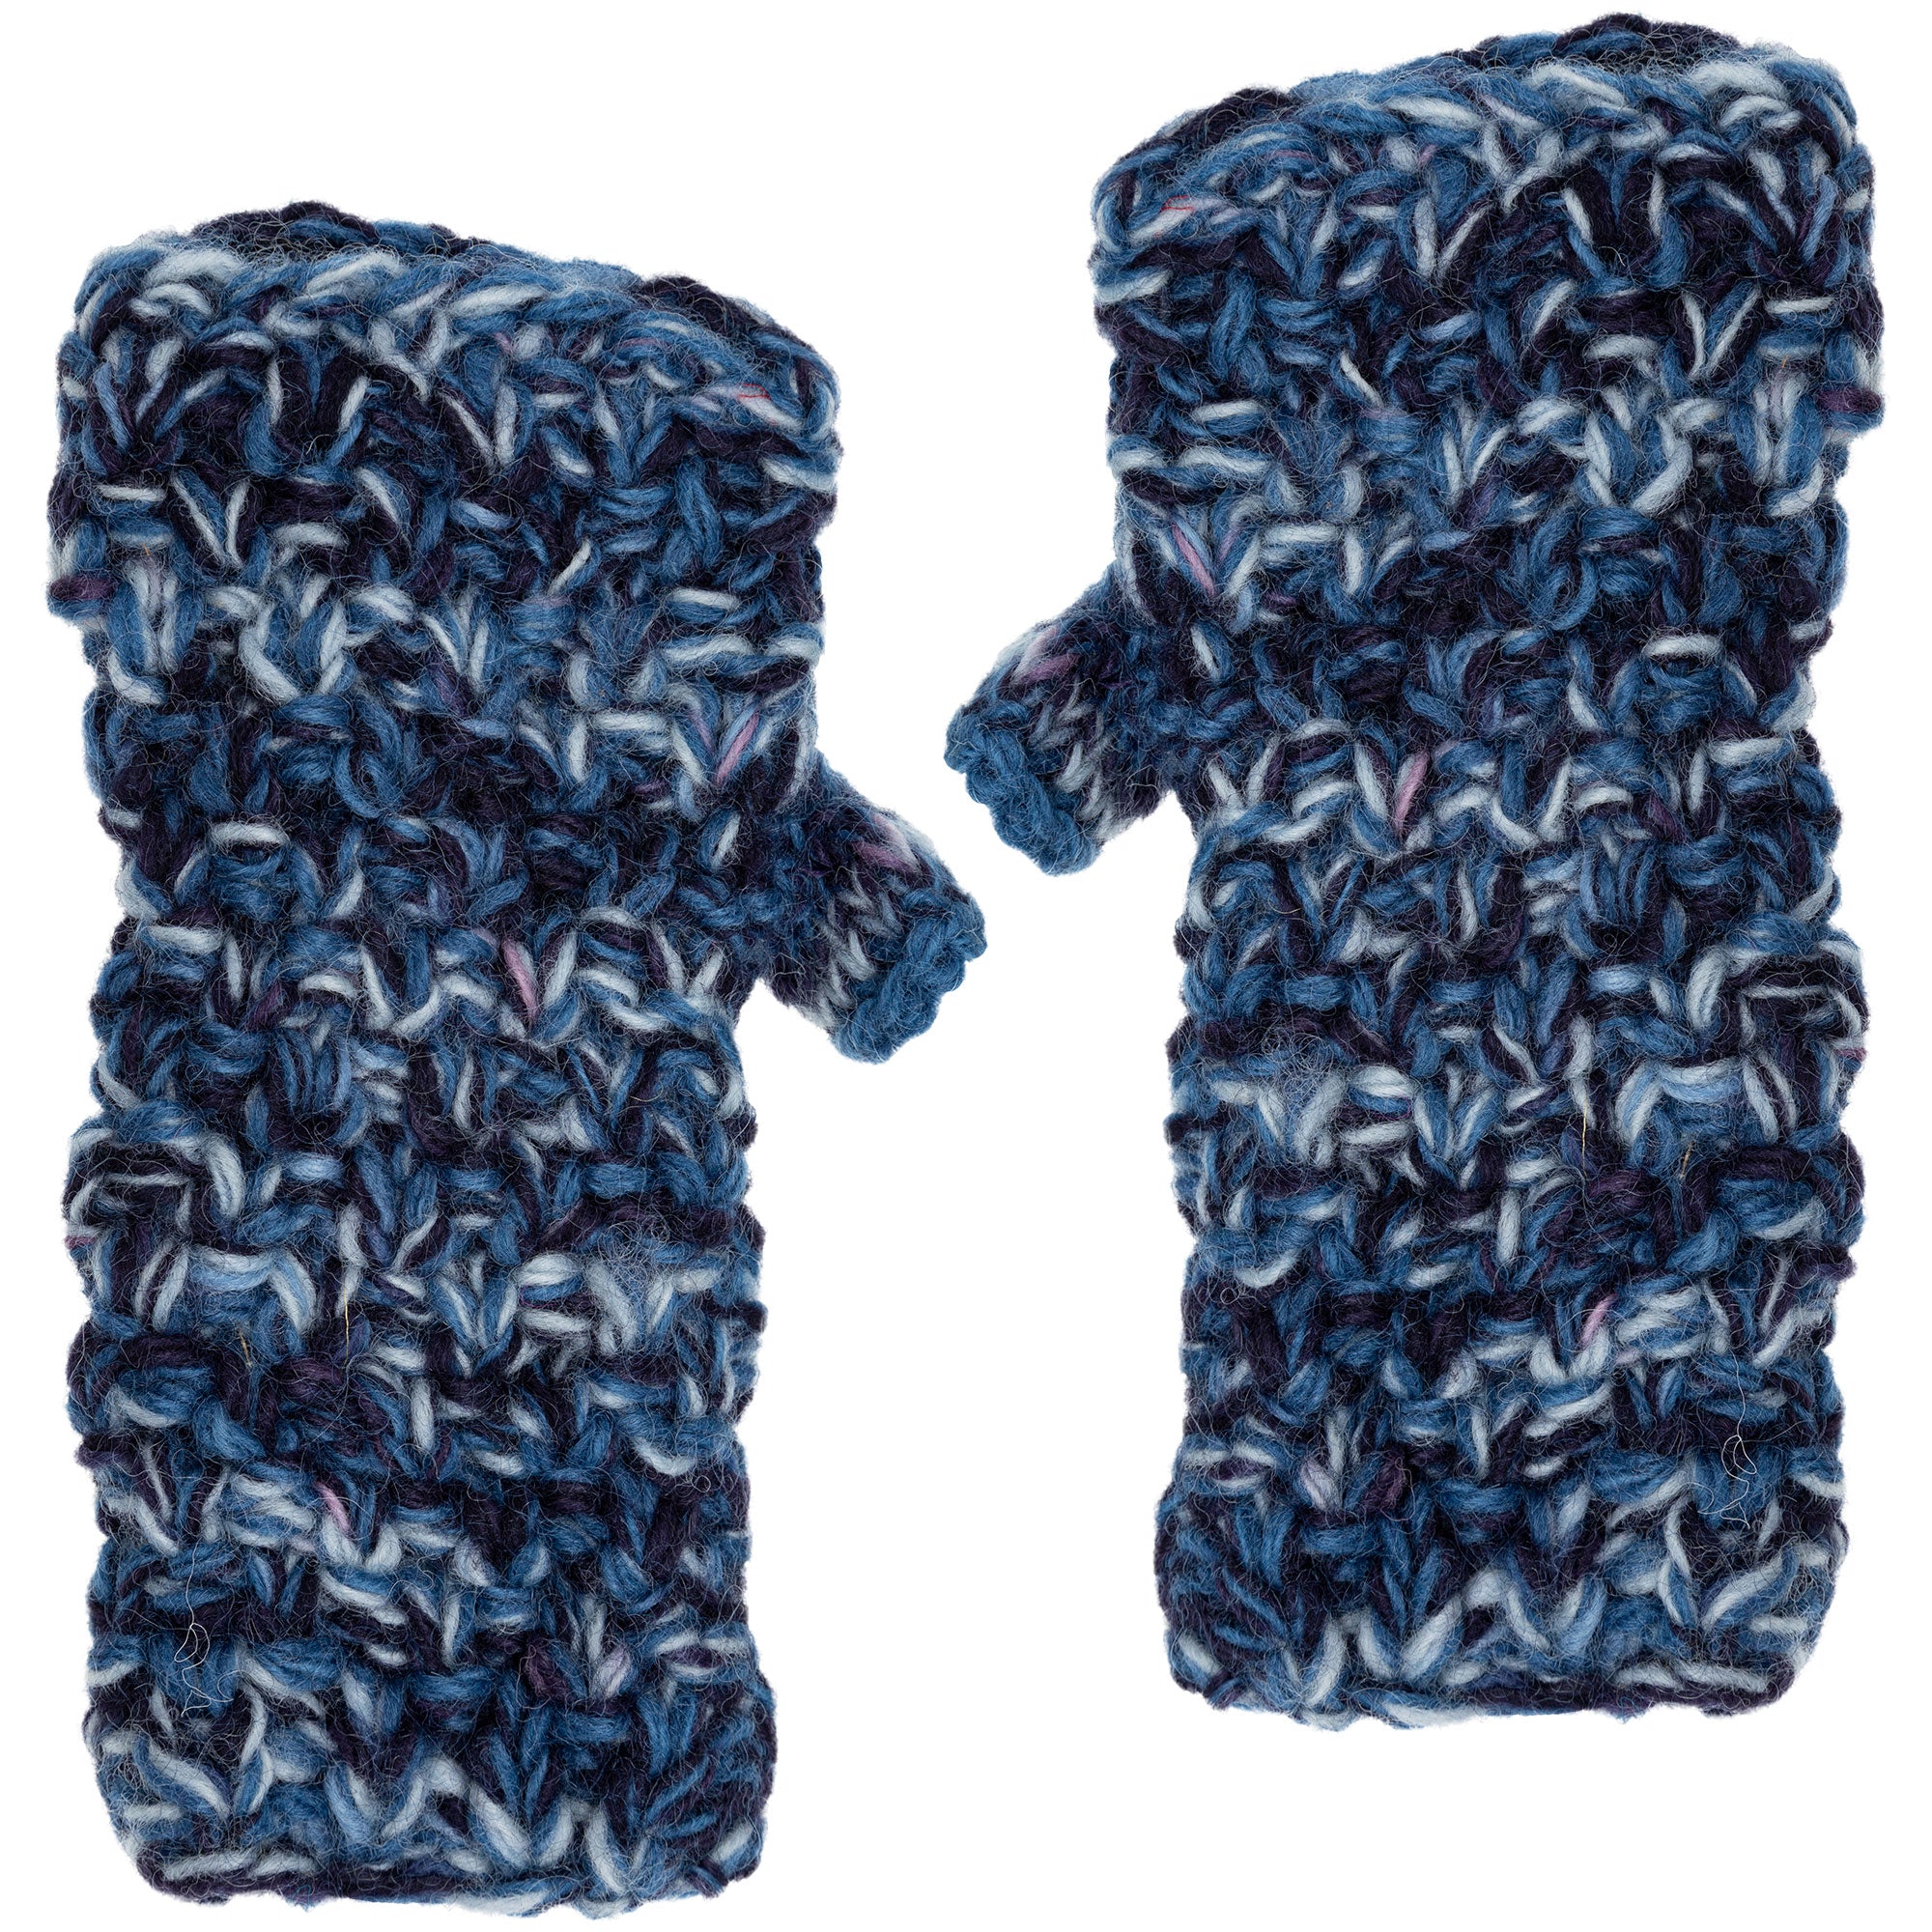 Heathered Wool Winter Accessories - Hand Warmers - Blue